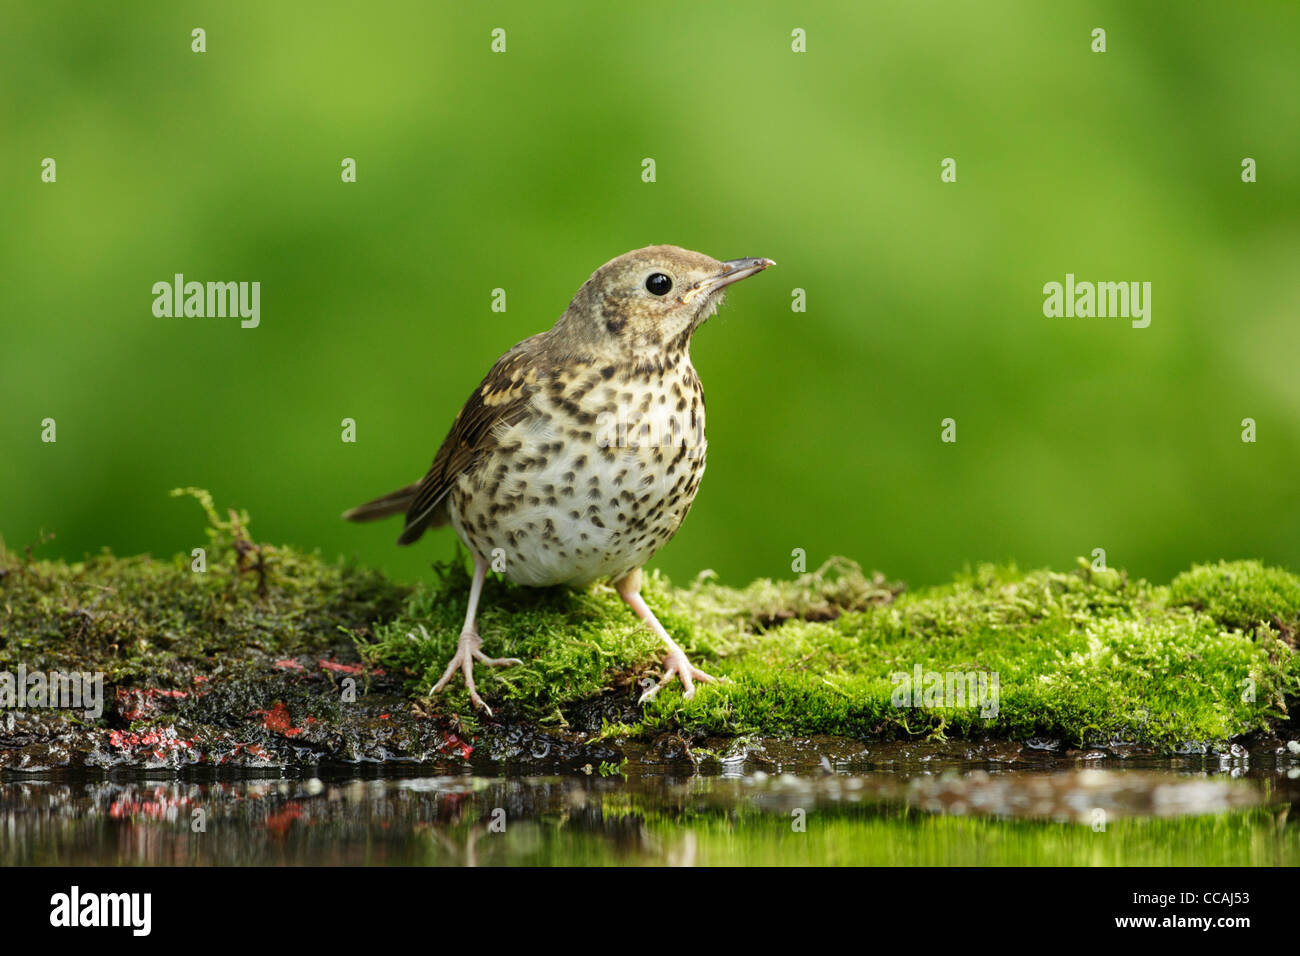 Song thrush (Turdus philomelos) standing on a moss covered bank at the edge of a woodland pond Stock Photo